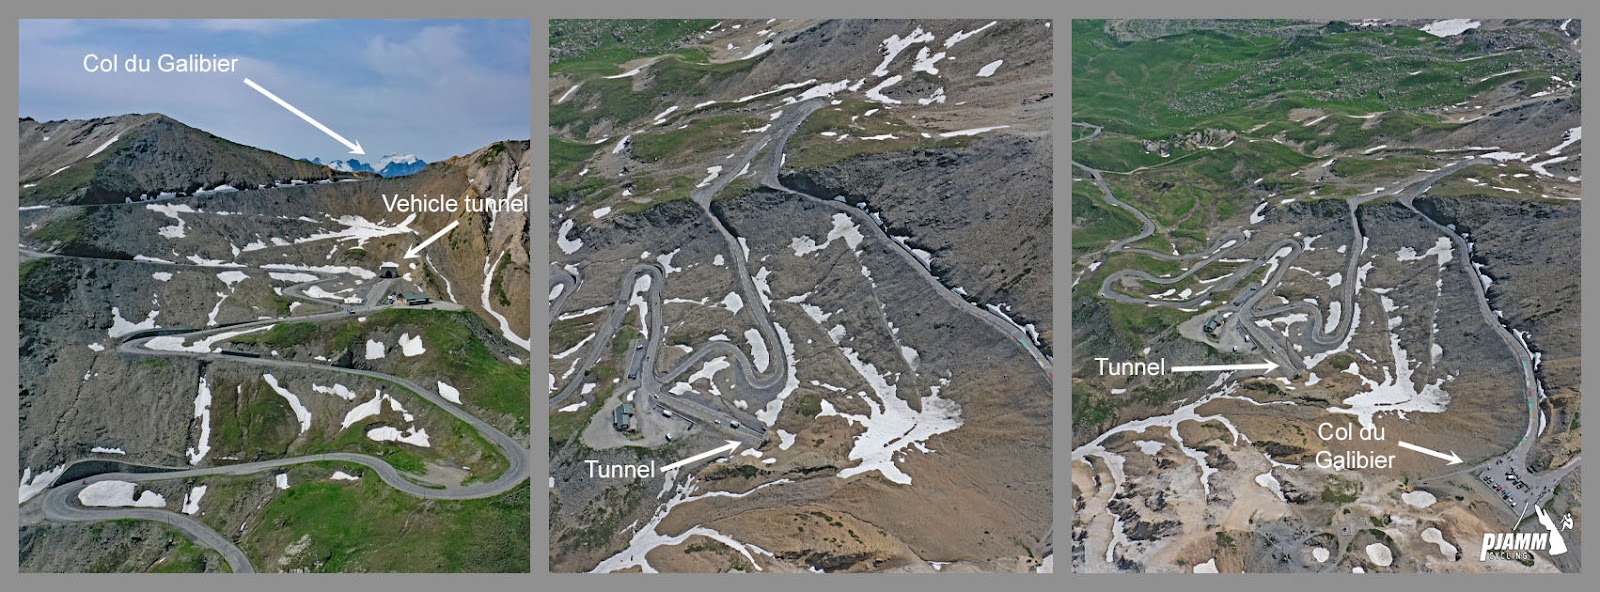 Cycling Col du Galibier from Valloire: photo collage shows final set of hairpin turns before climb finish, with Col du Galibier and vehicle tunnel pointed out